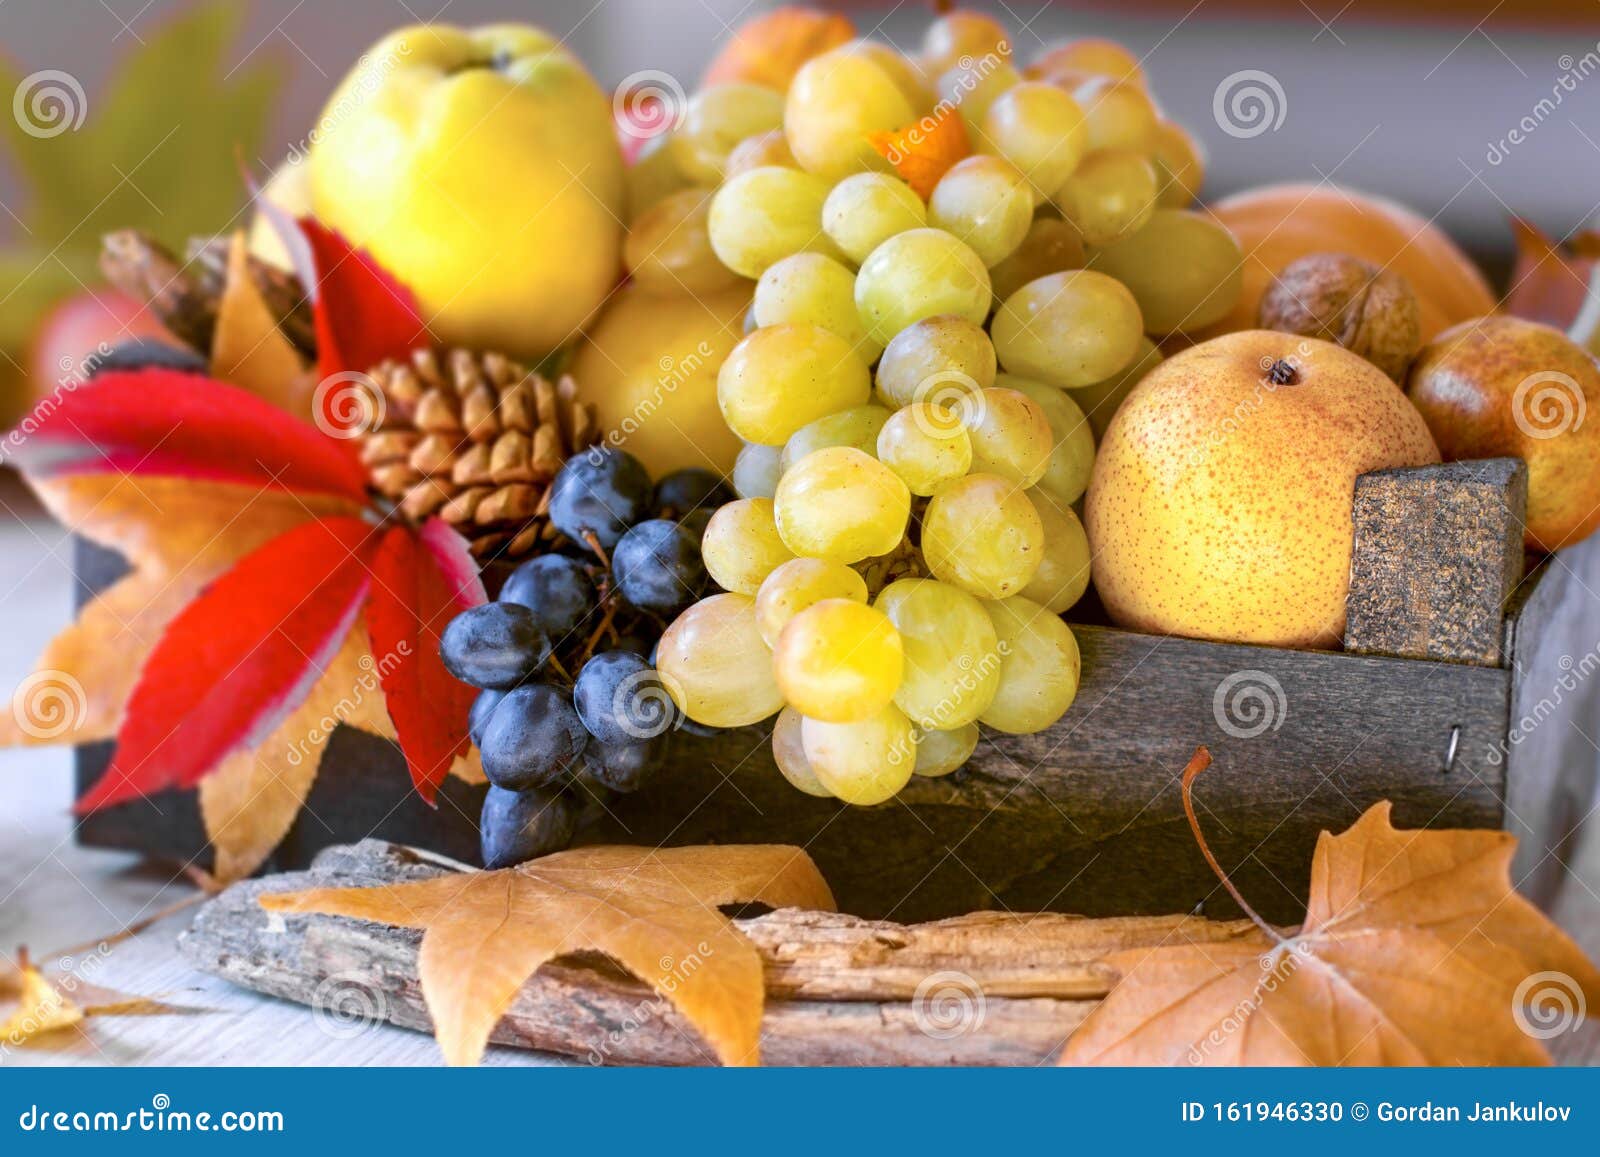 autumn frut and vegetable in wooden crate